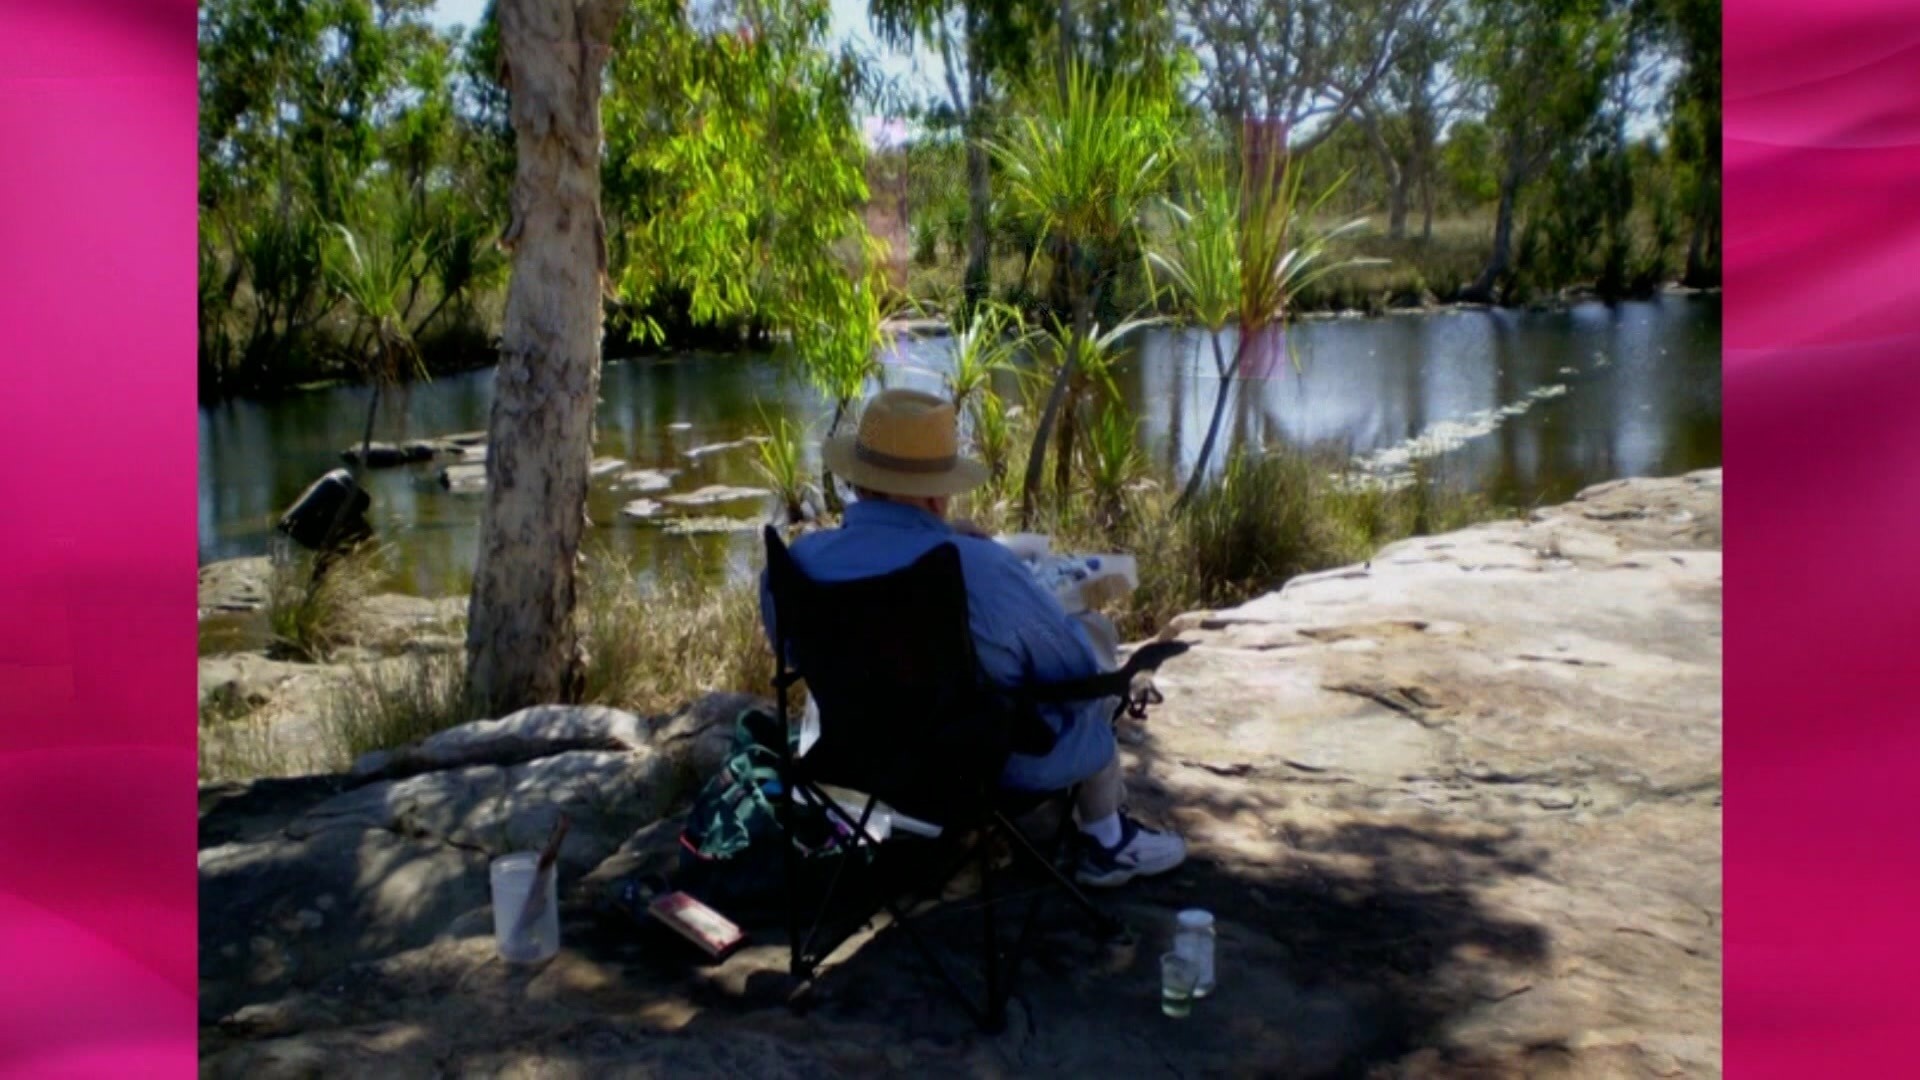 Barry  Humphries on a chair in the bush with his back to the camera.